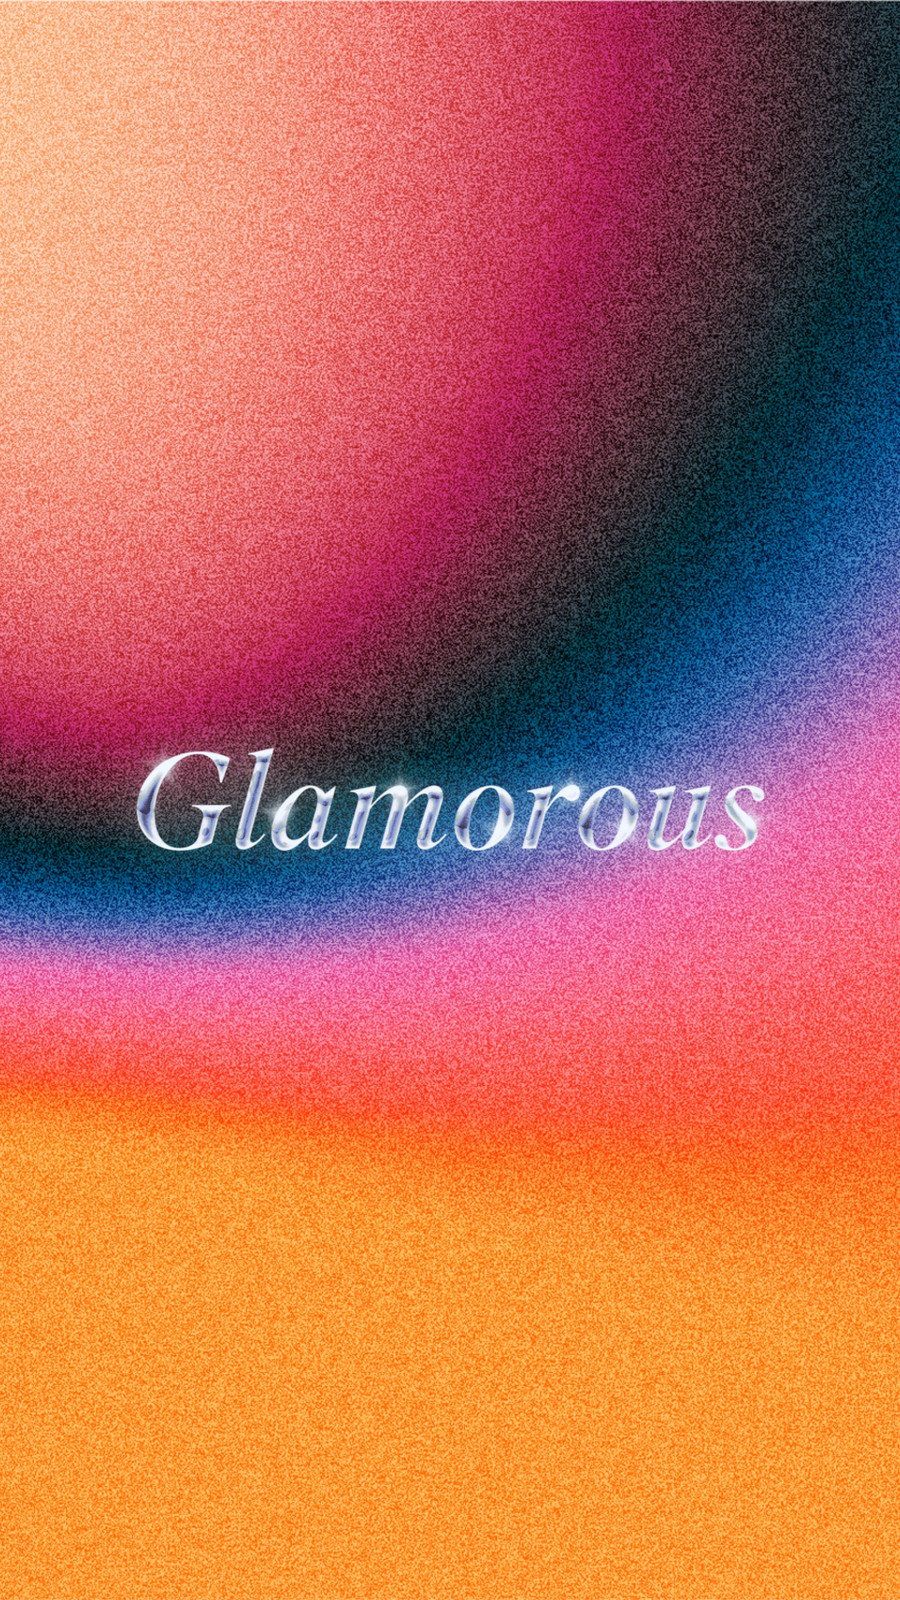 A colorful background with the word glamorous - 80s